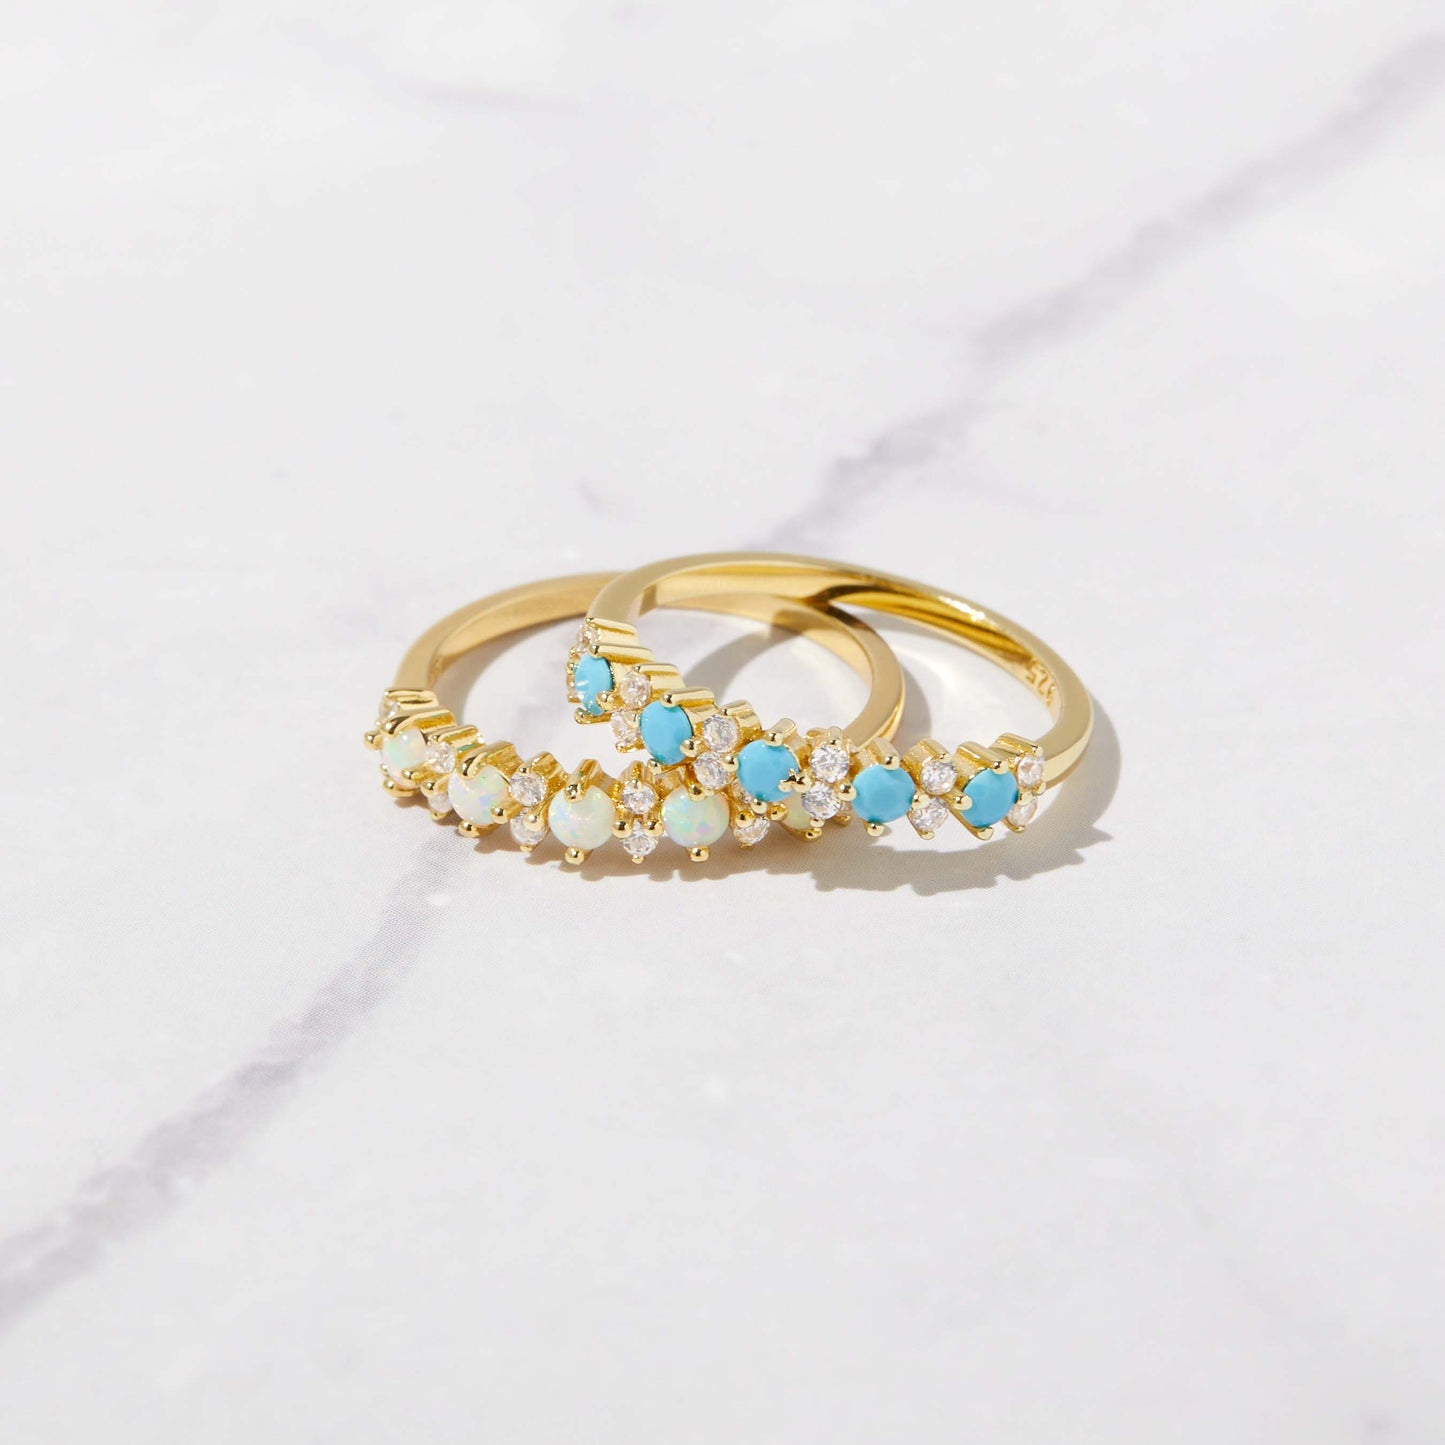 Turquoise & CZ Ring